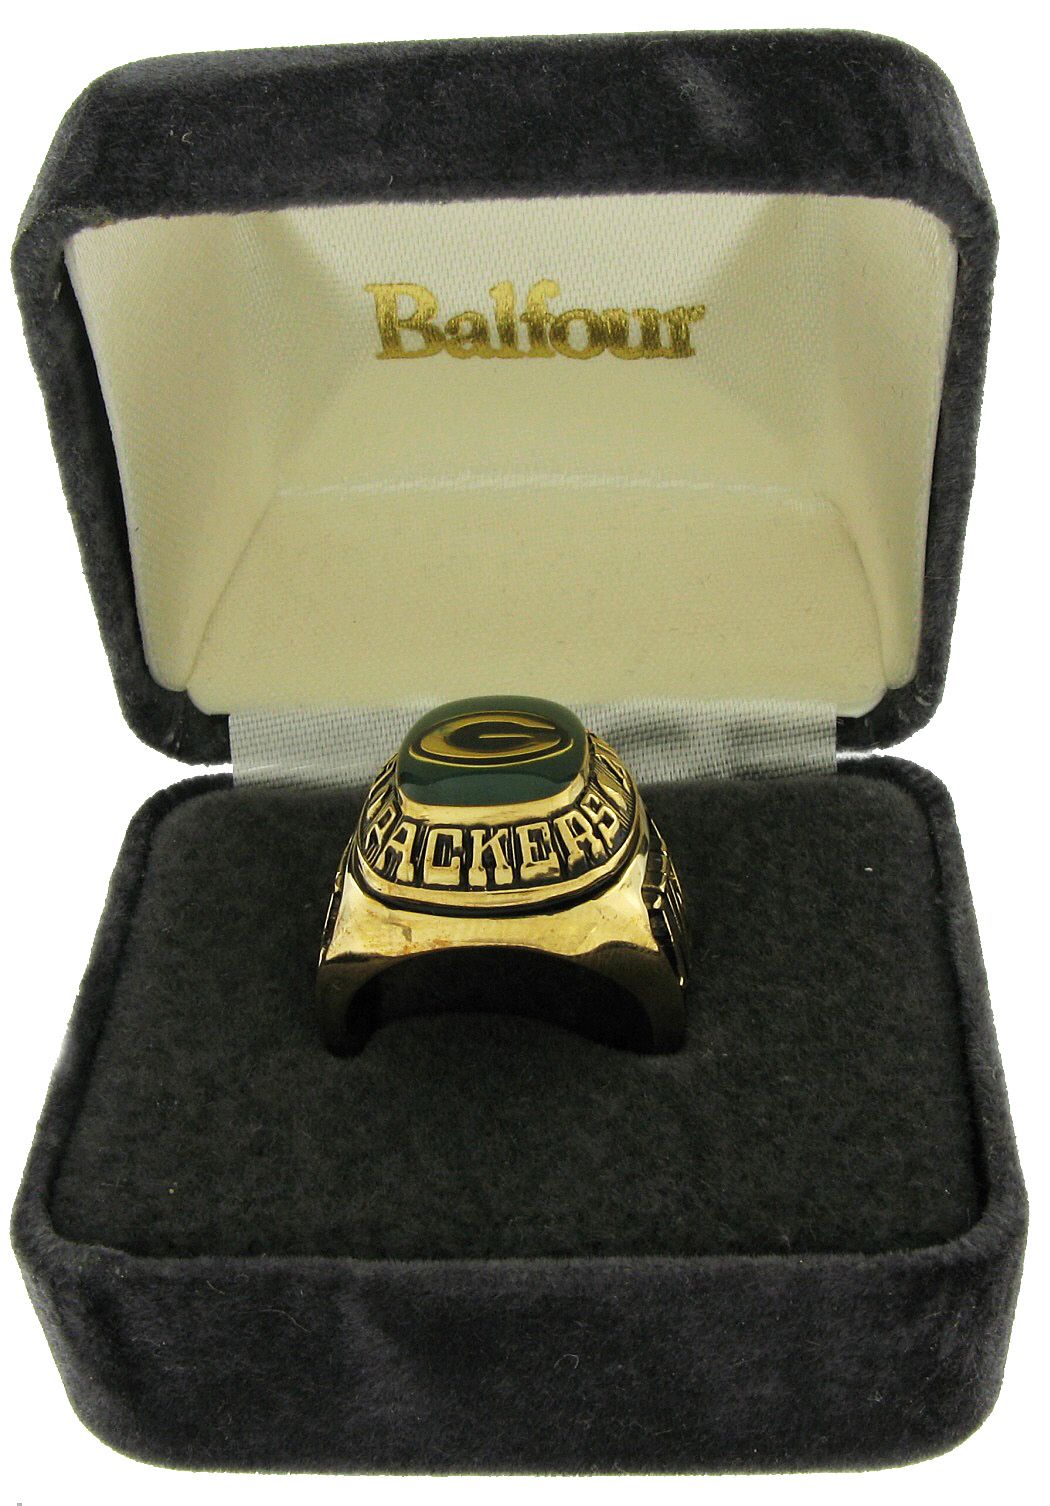 Balfour Ring Football Offical NFL Green Bay Packers Sz 7 5